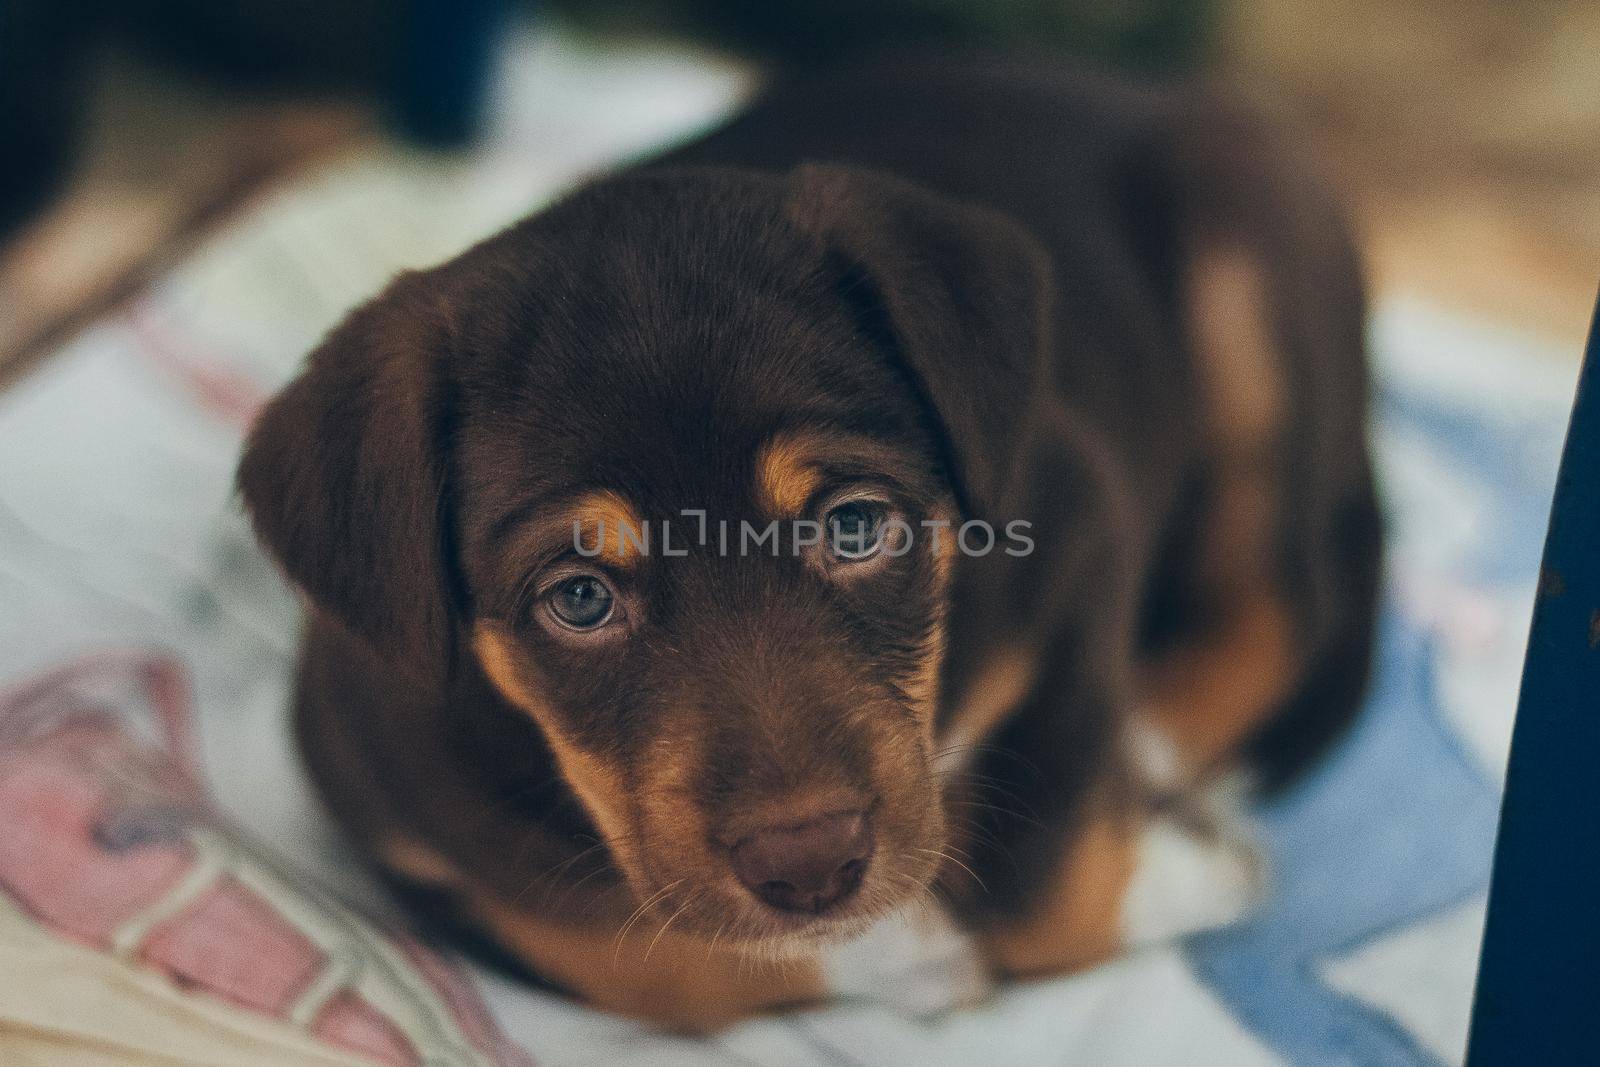 Lovely brown puppy dog portrait looking up with beautiful blue eyes